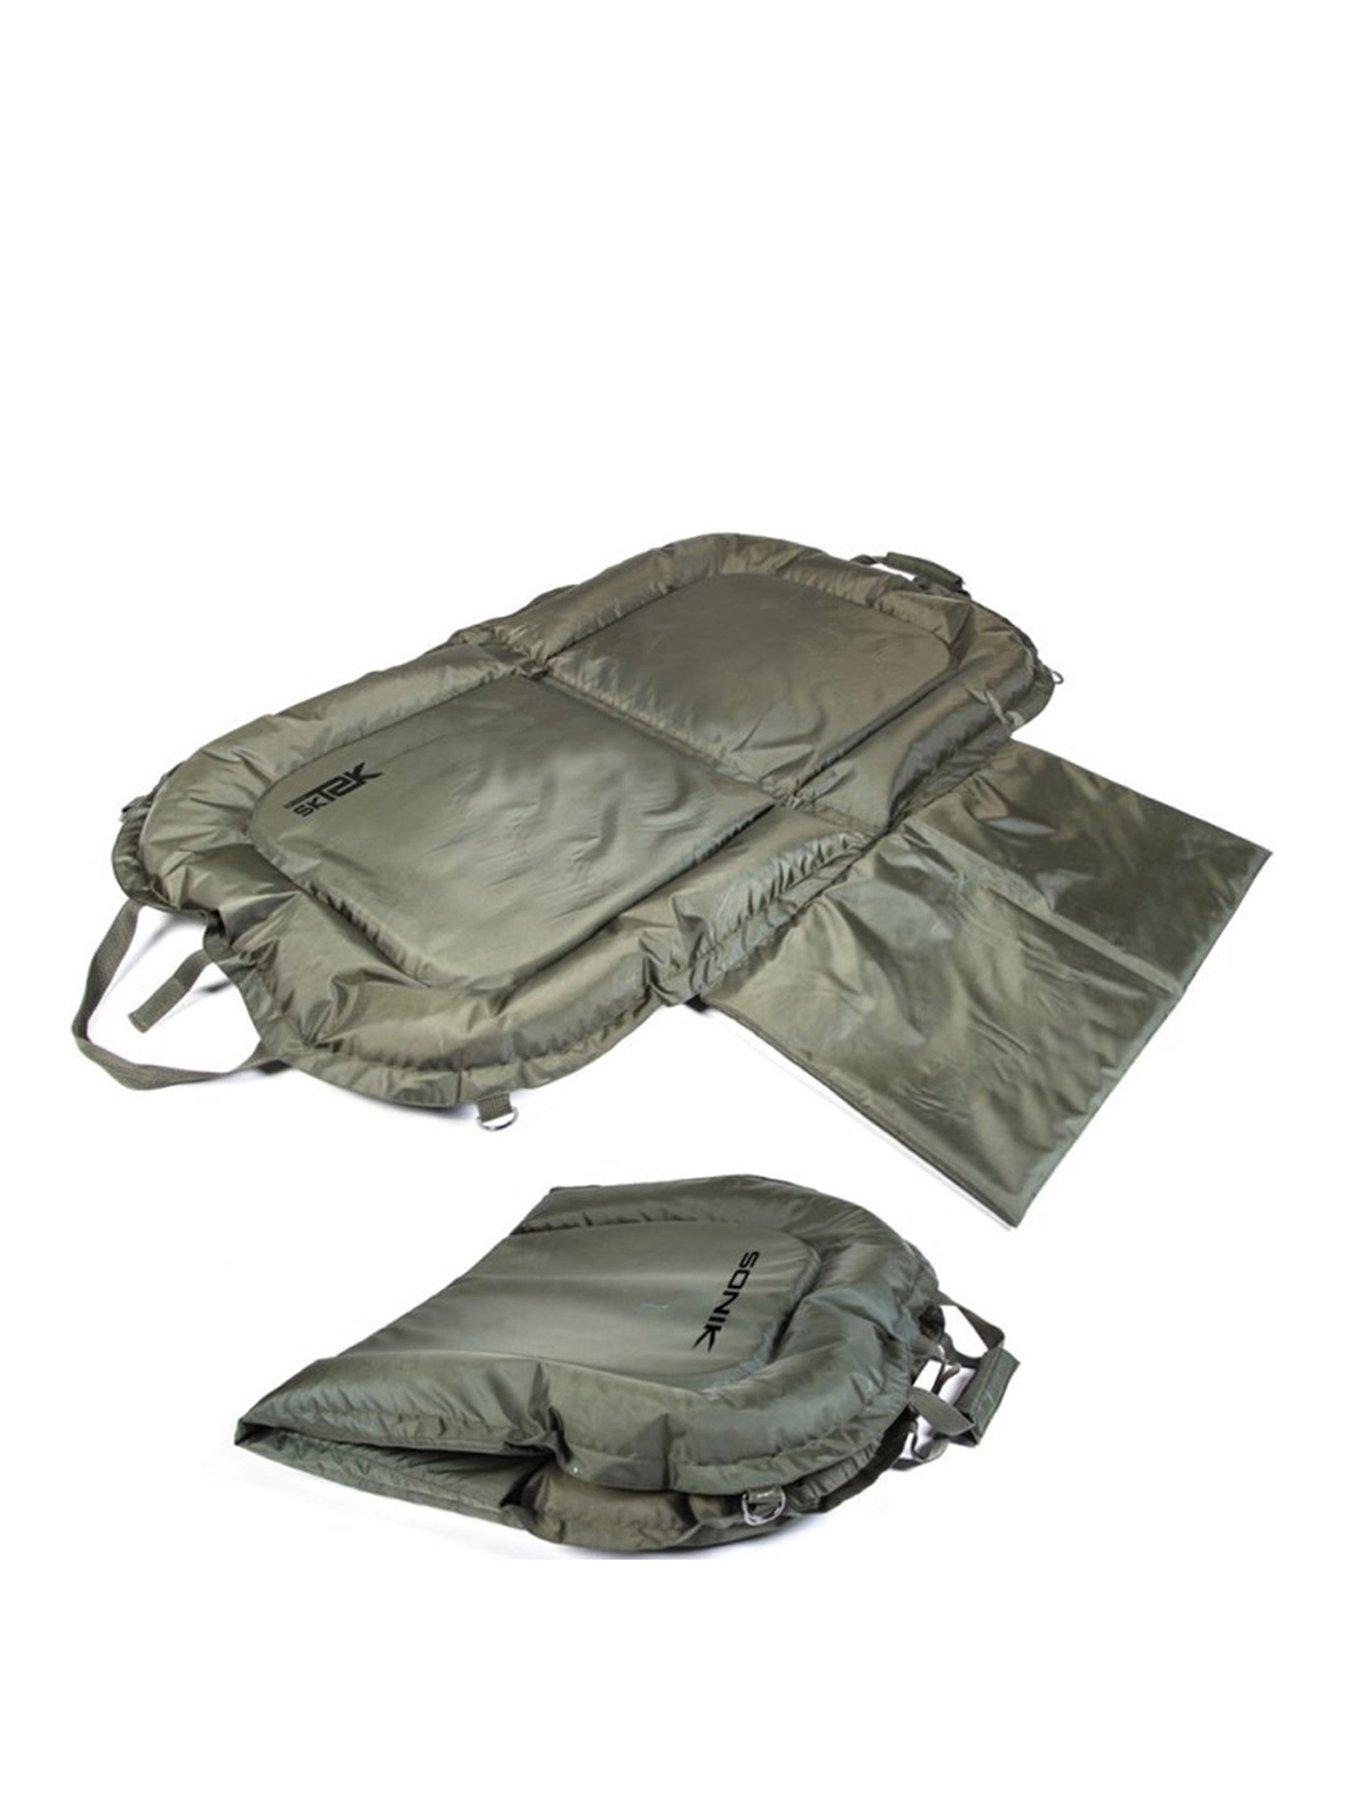 Fishing Carp Cradle Framed Unhooking Mat With Adjustable Legs Plus Carryall  To Store And Carry - Better Sporting